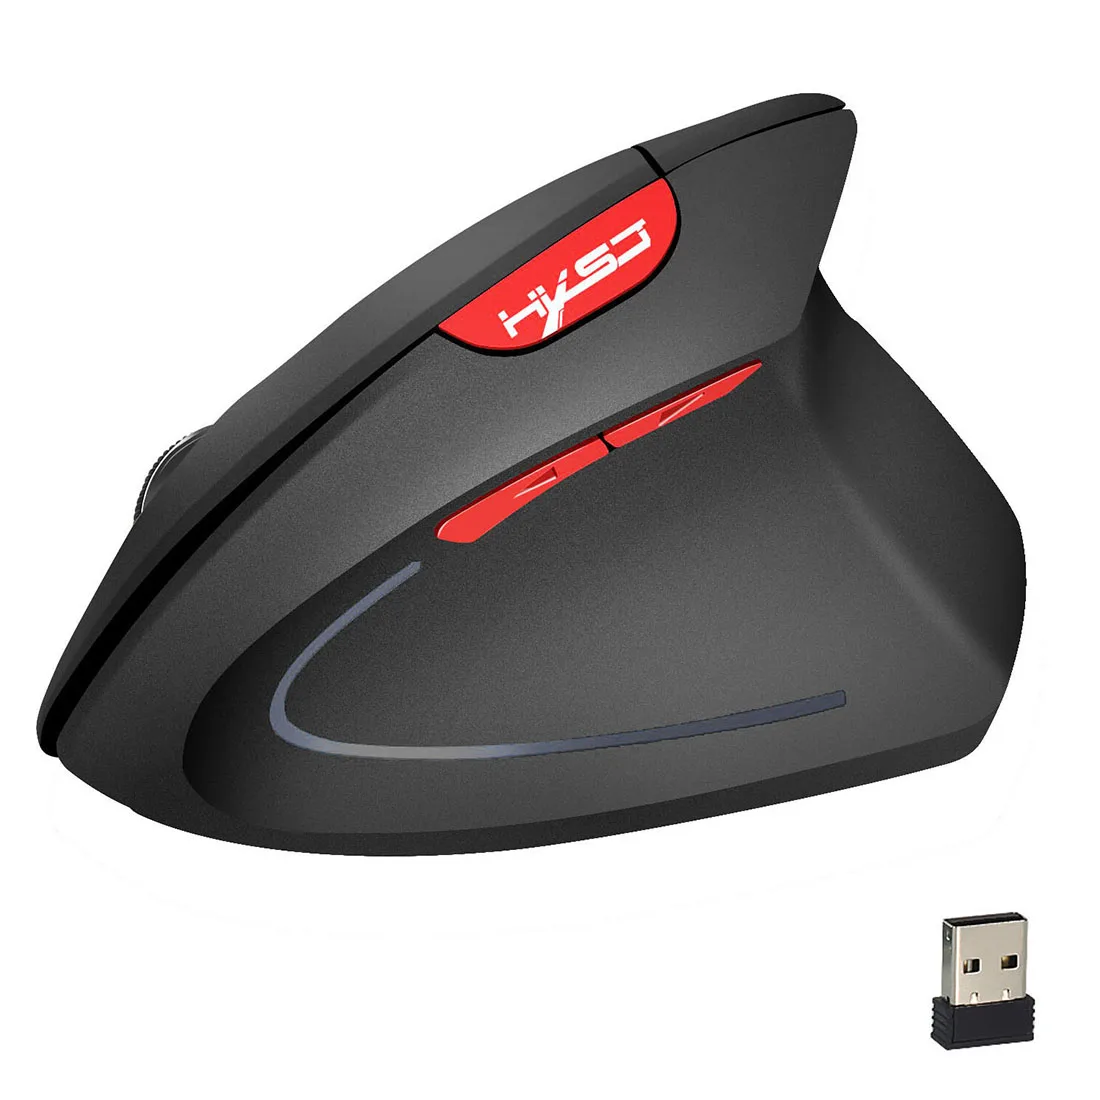 

Hxsj Wireless Mouse Optical 2.4G Mouse Ergonomics 800/1600/2400Dpi Wrist Treatment Vertical Mouse For Pc And Notebook